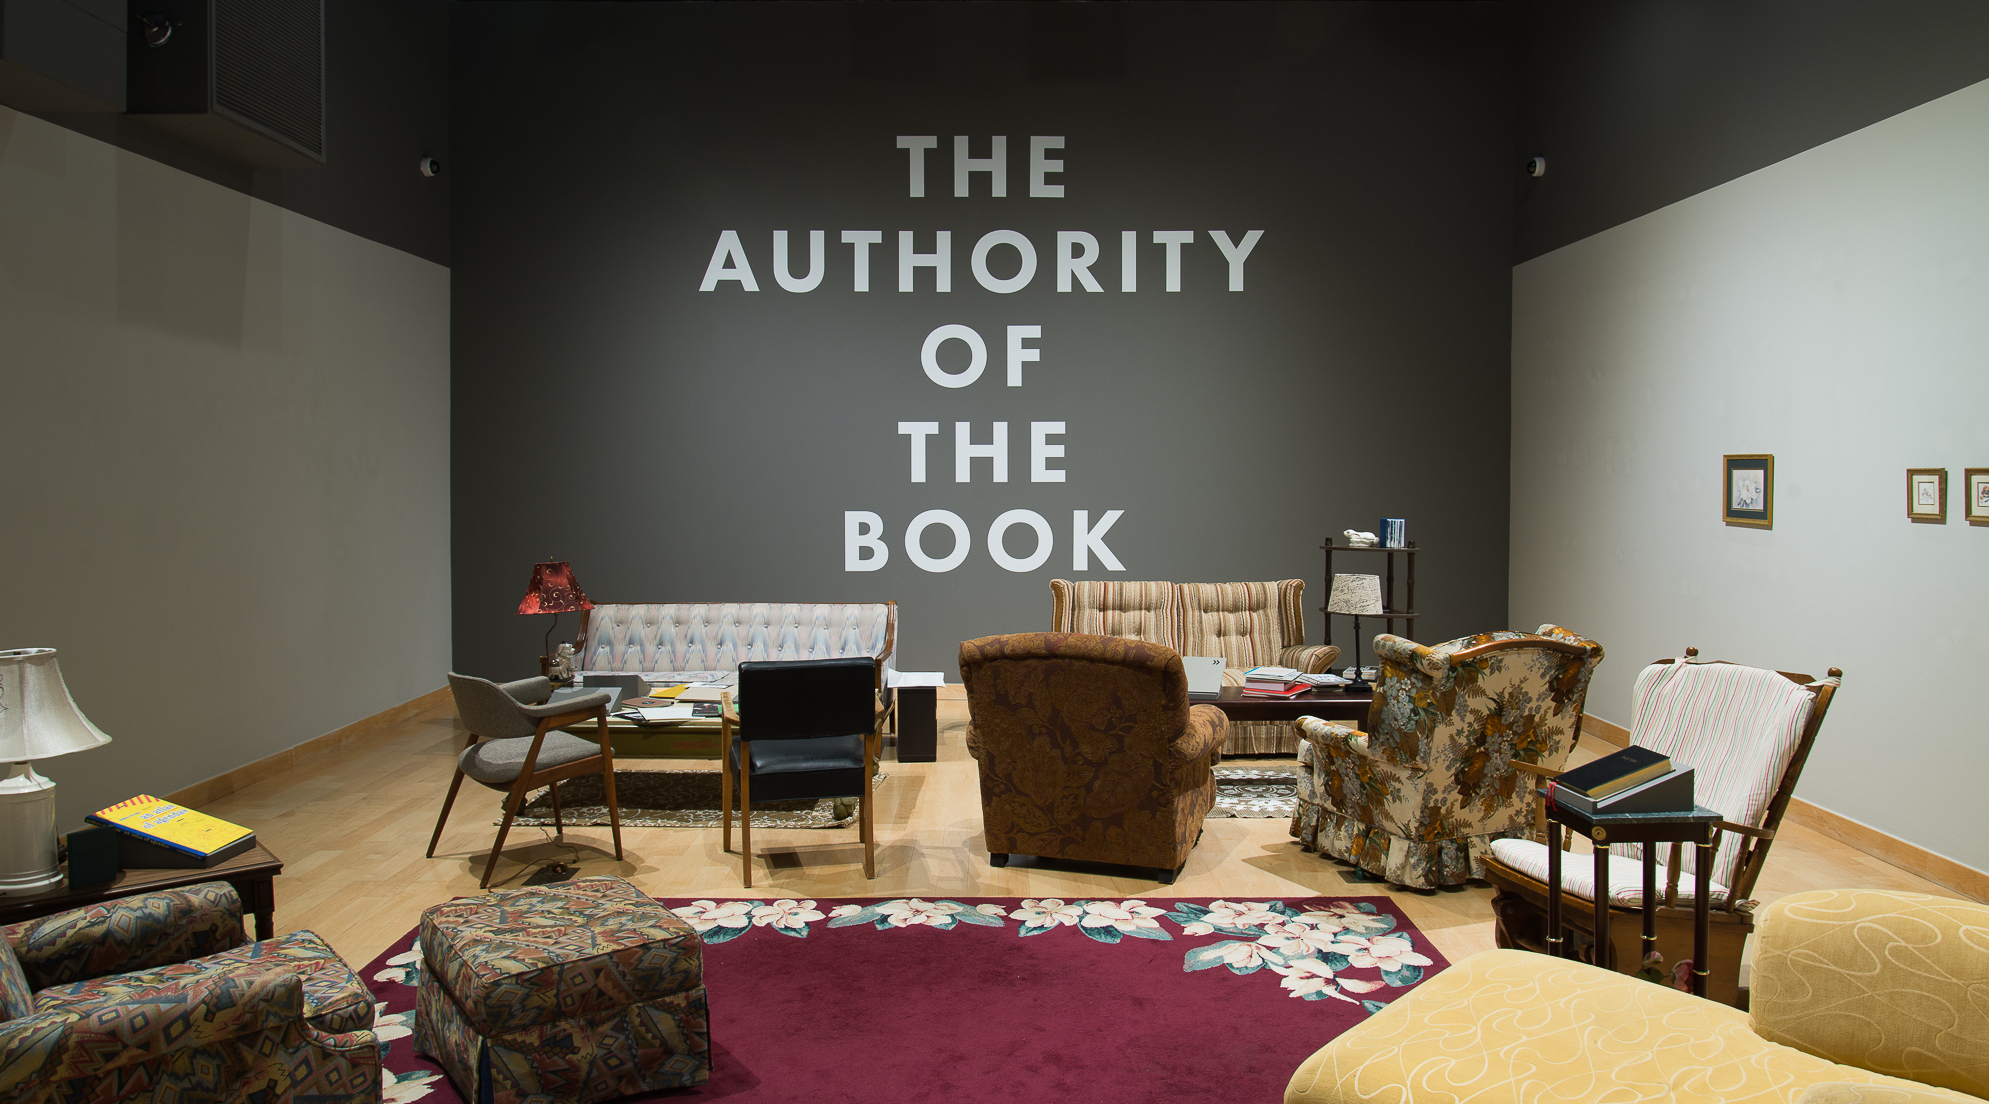 The Authority of the Book in Gallery B